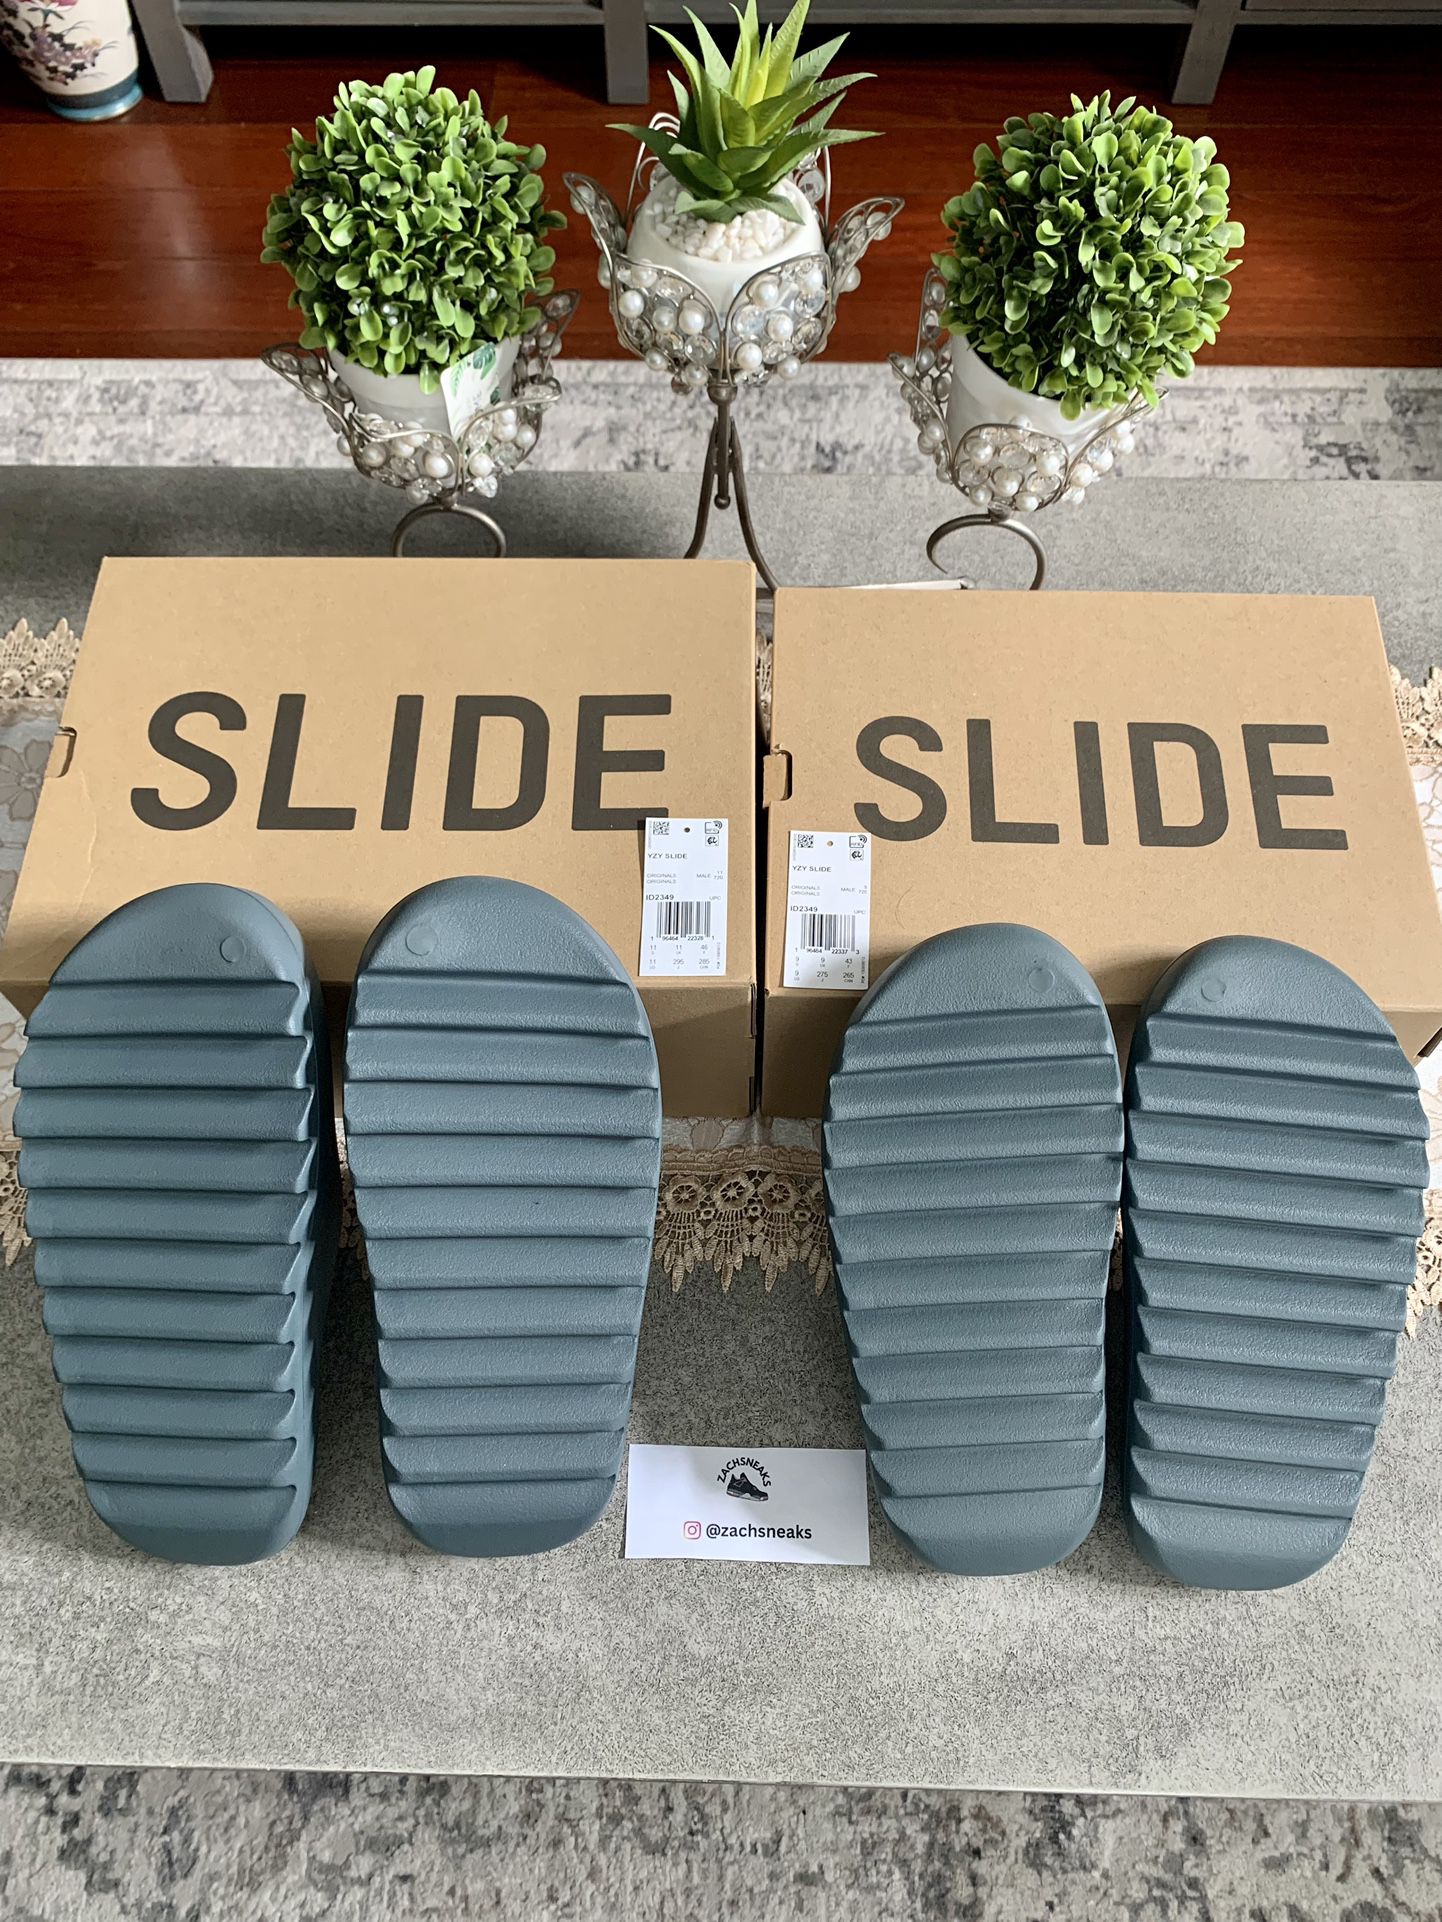 Yeezy Slides 6w for Sale in Covina, CA - OfferUp